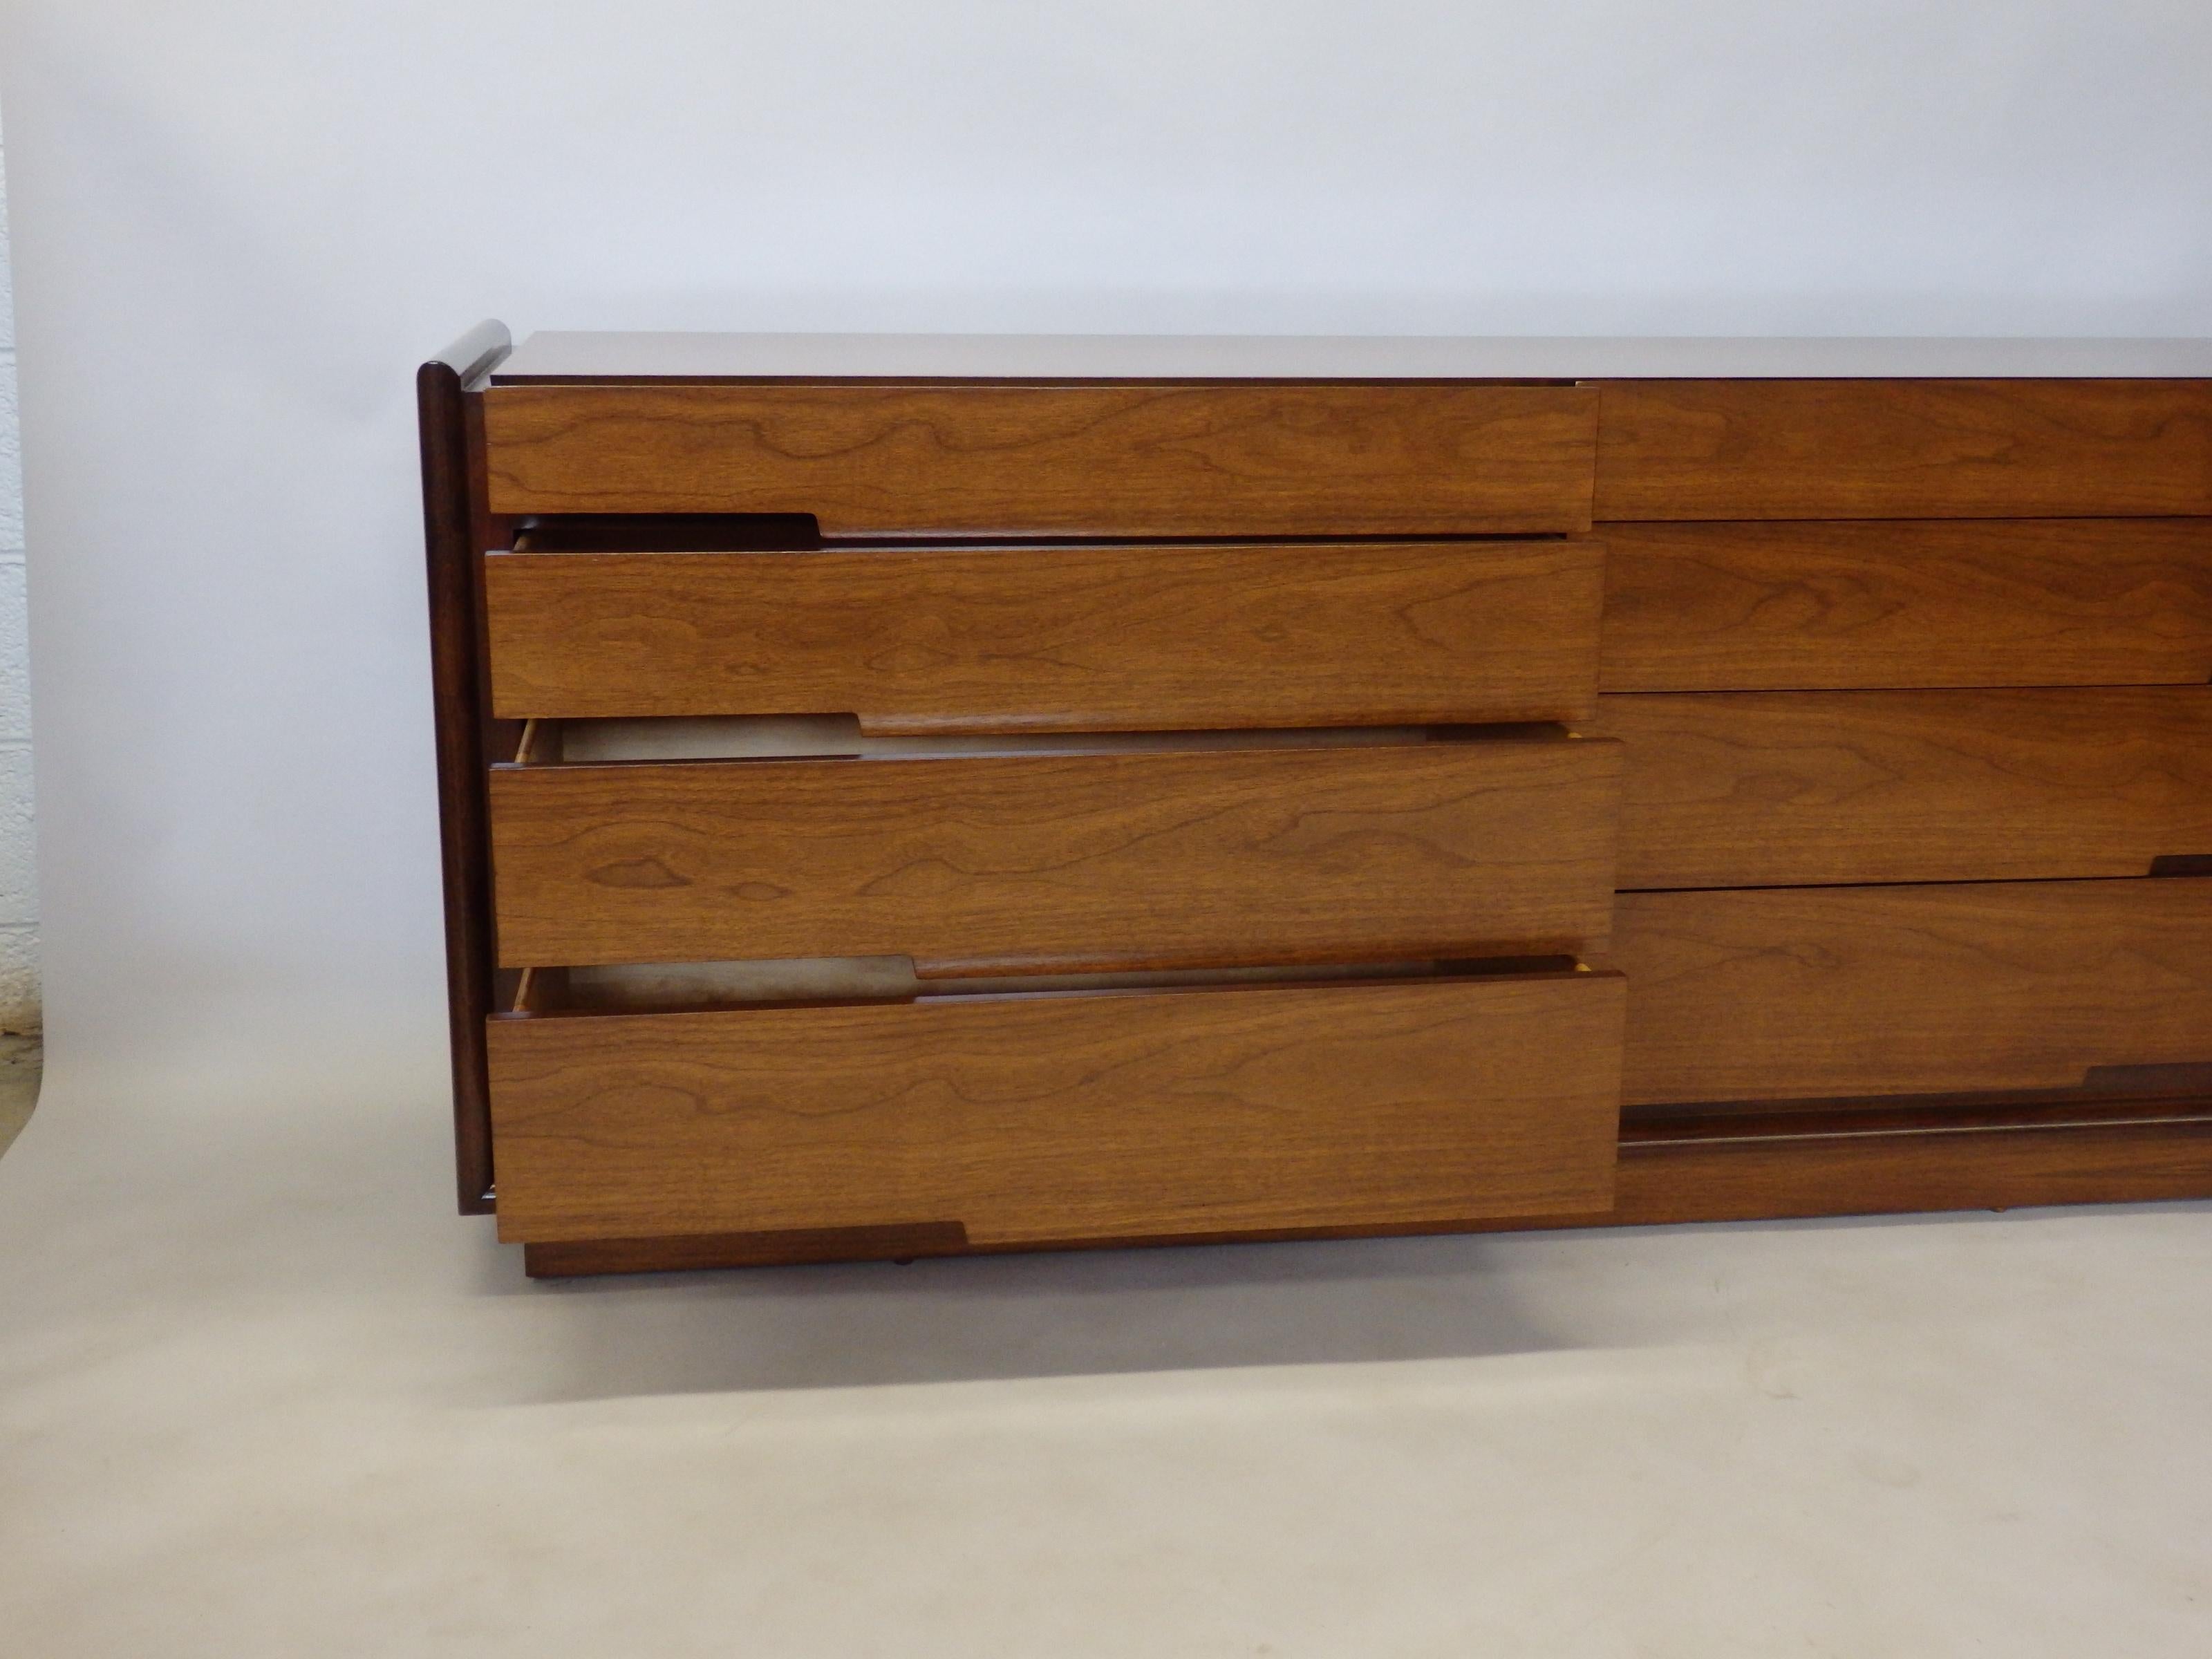 Walnut Edmund Spence Long Low Swedish Double Dresser with graduated drawers